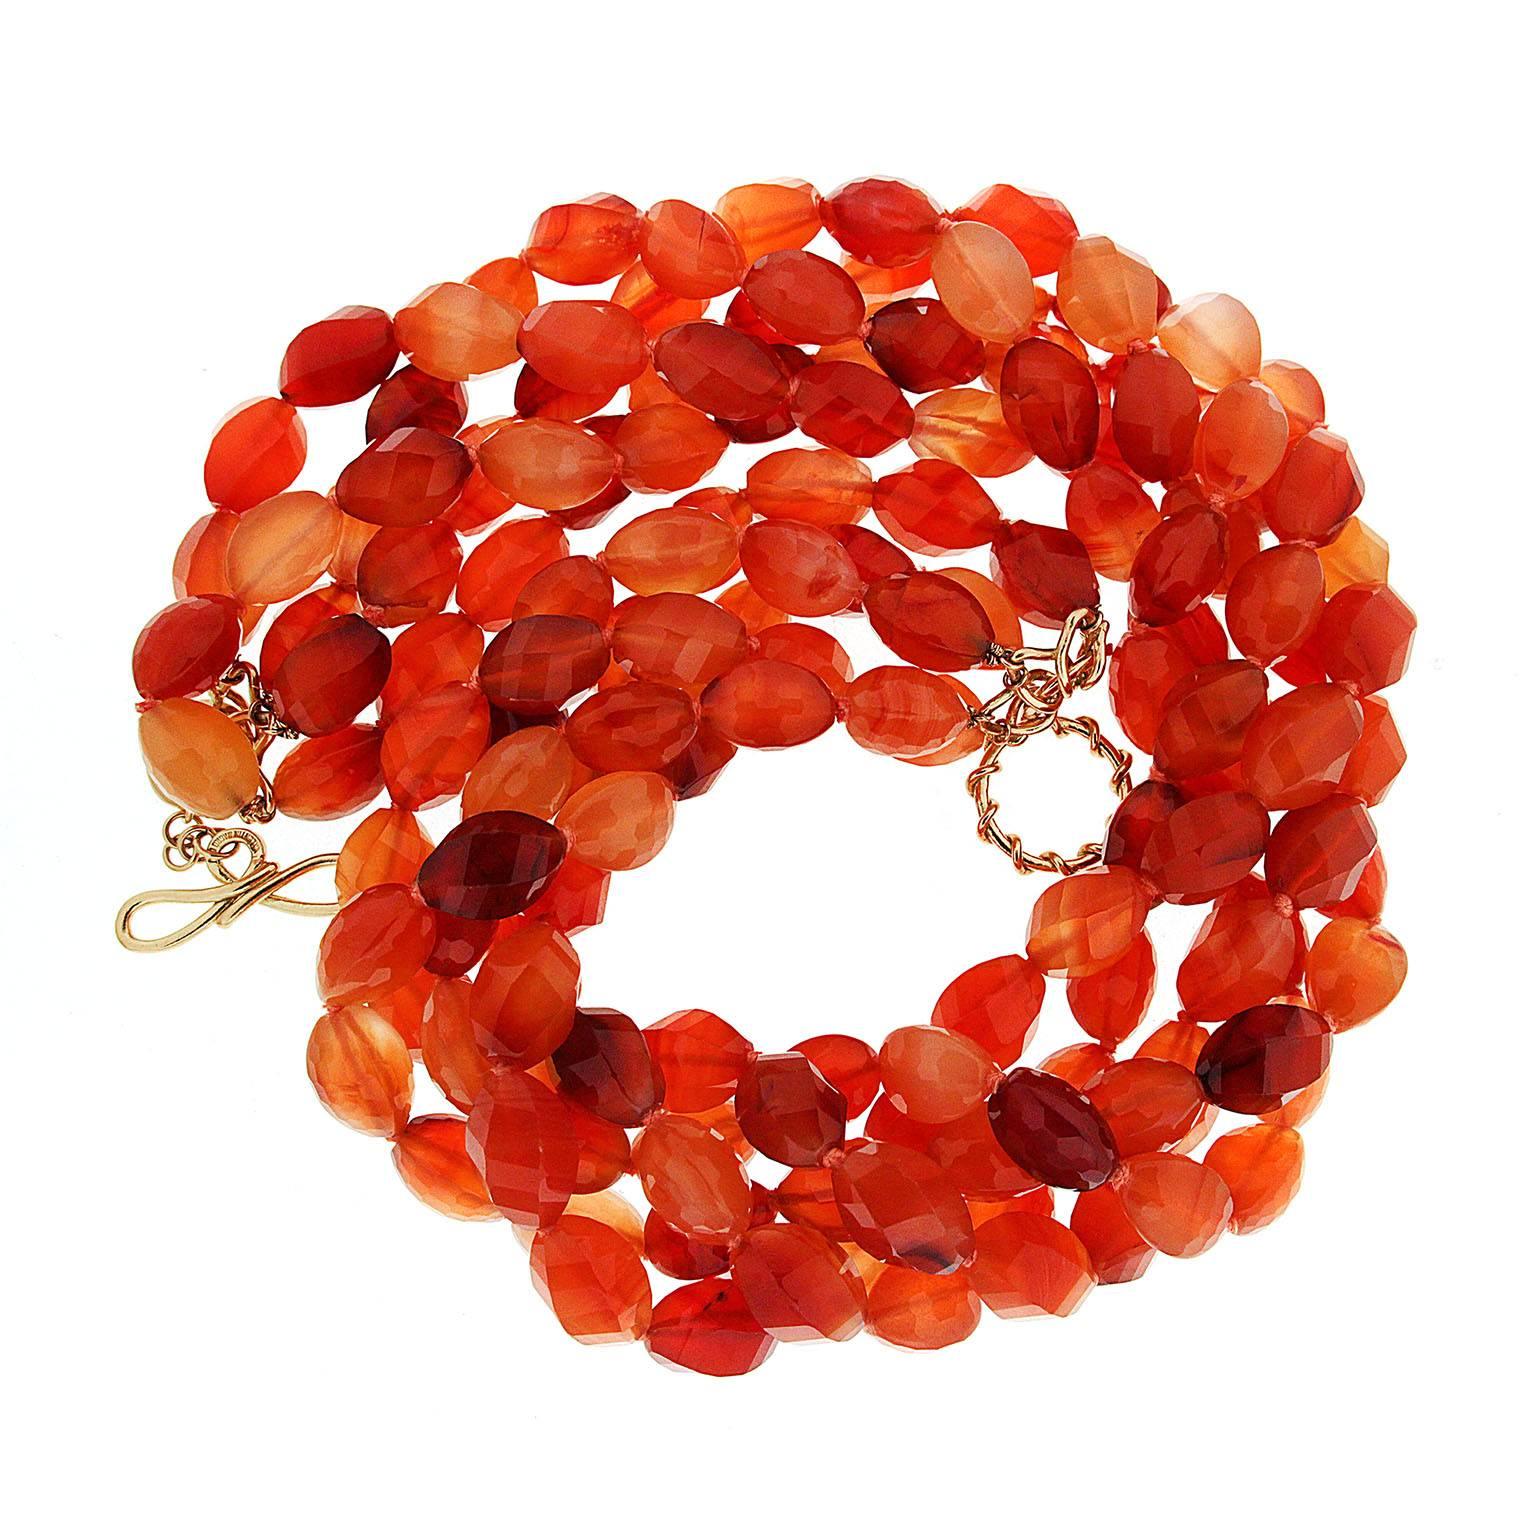 This necklace features five strands of carnelian stones with an 18kt yellow gold ring and toggle clasp.